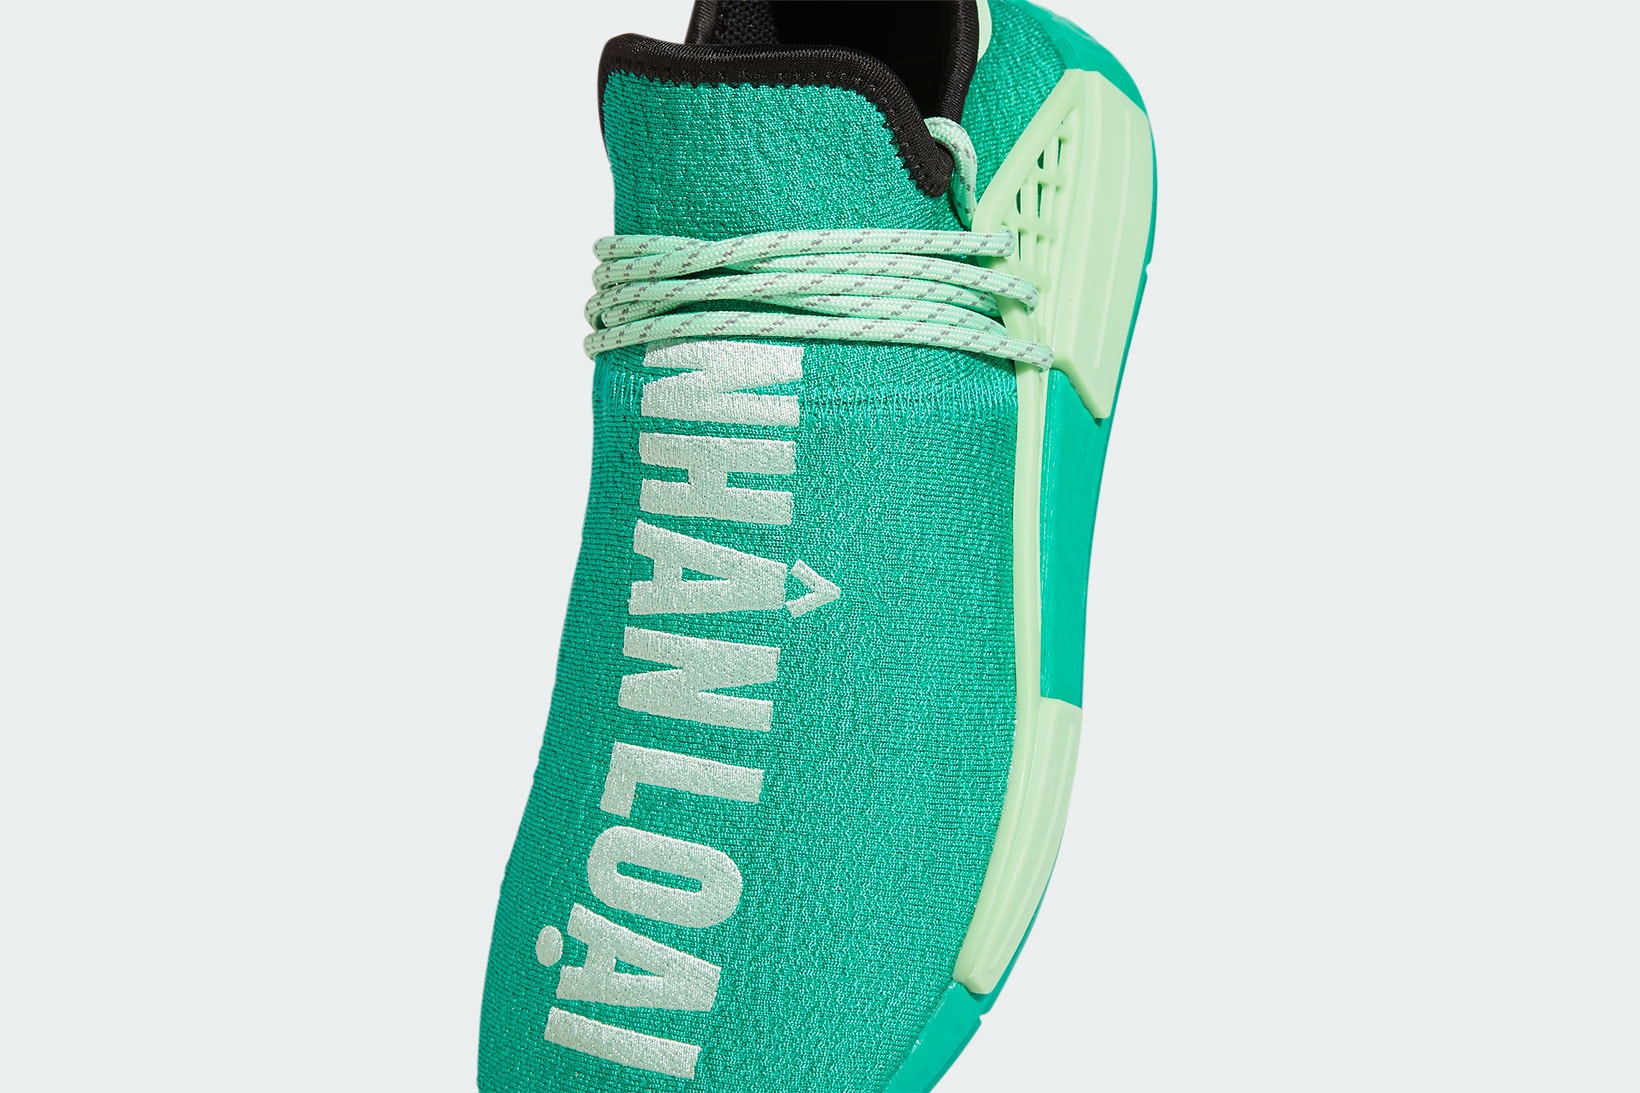 pharrell williams adidas originals pw hu nmd collaboration sneakers mint green new colorway sneakerhead footwear shoes 